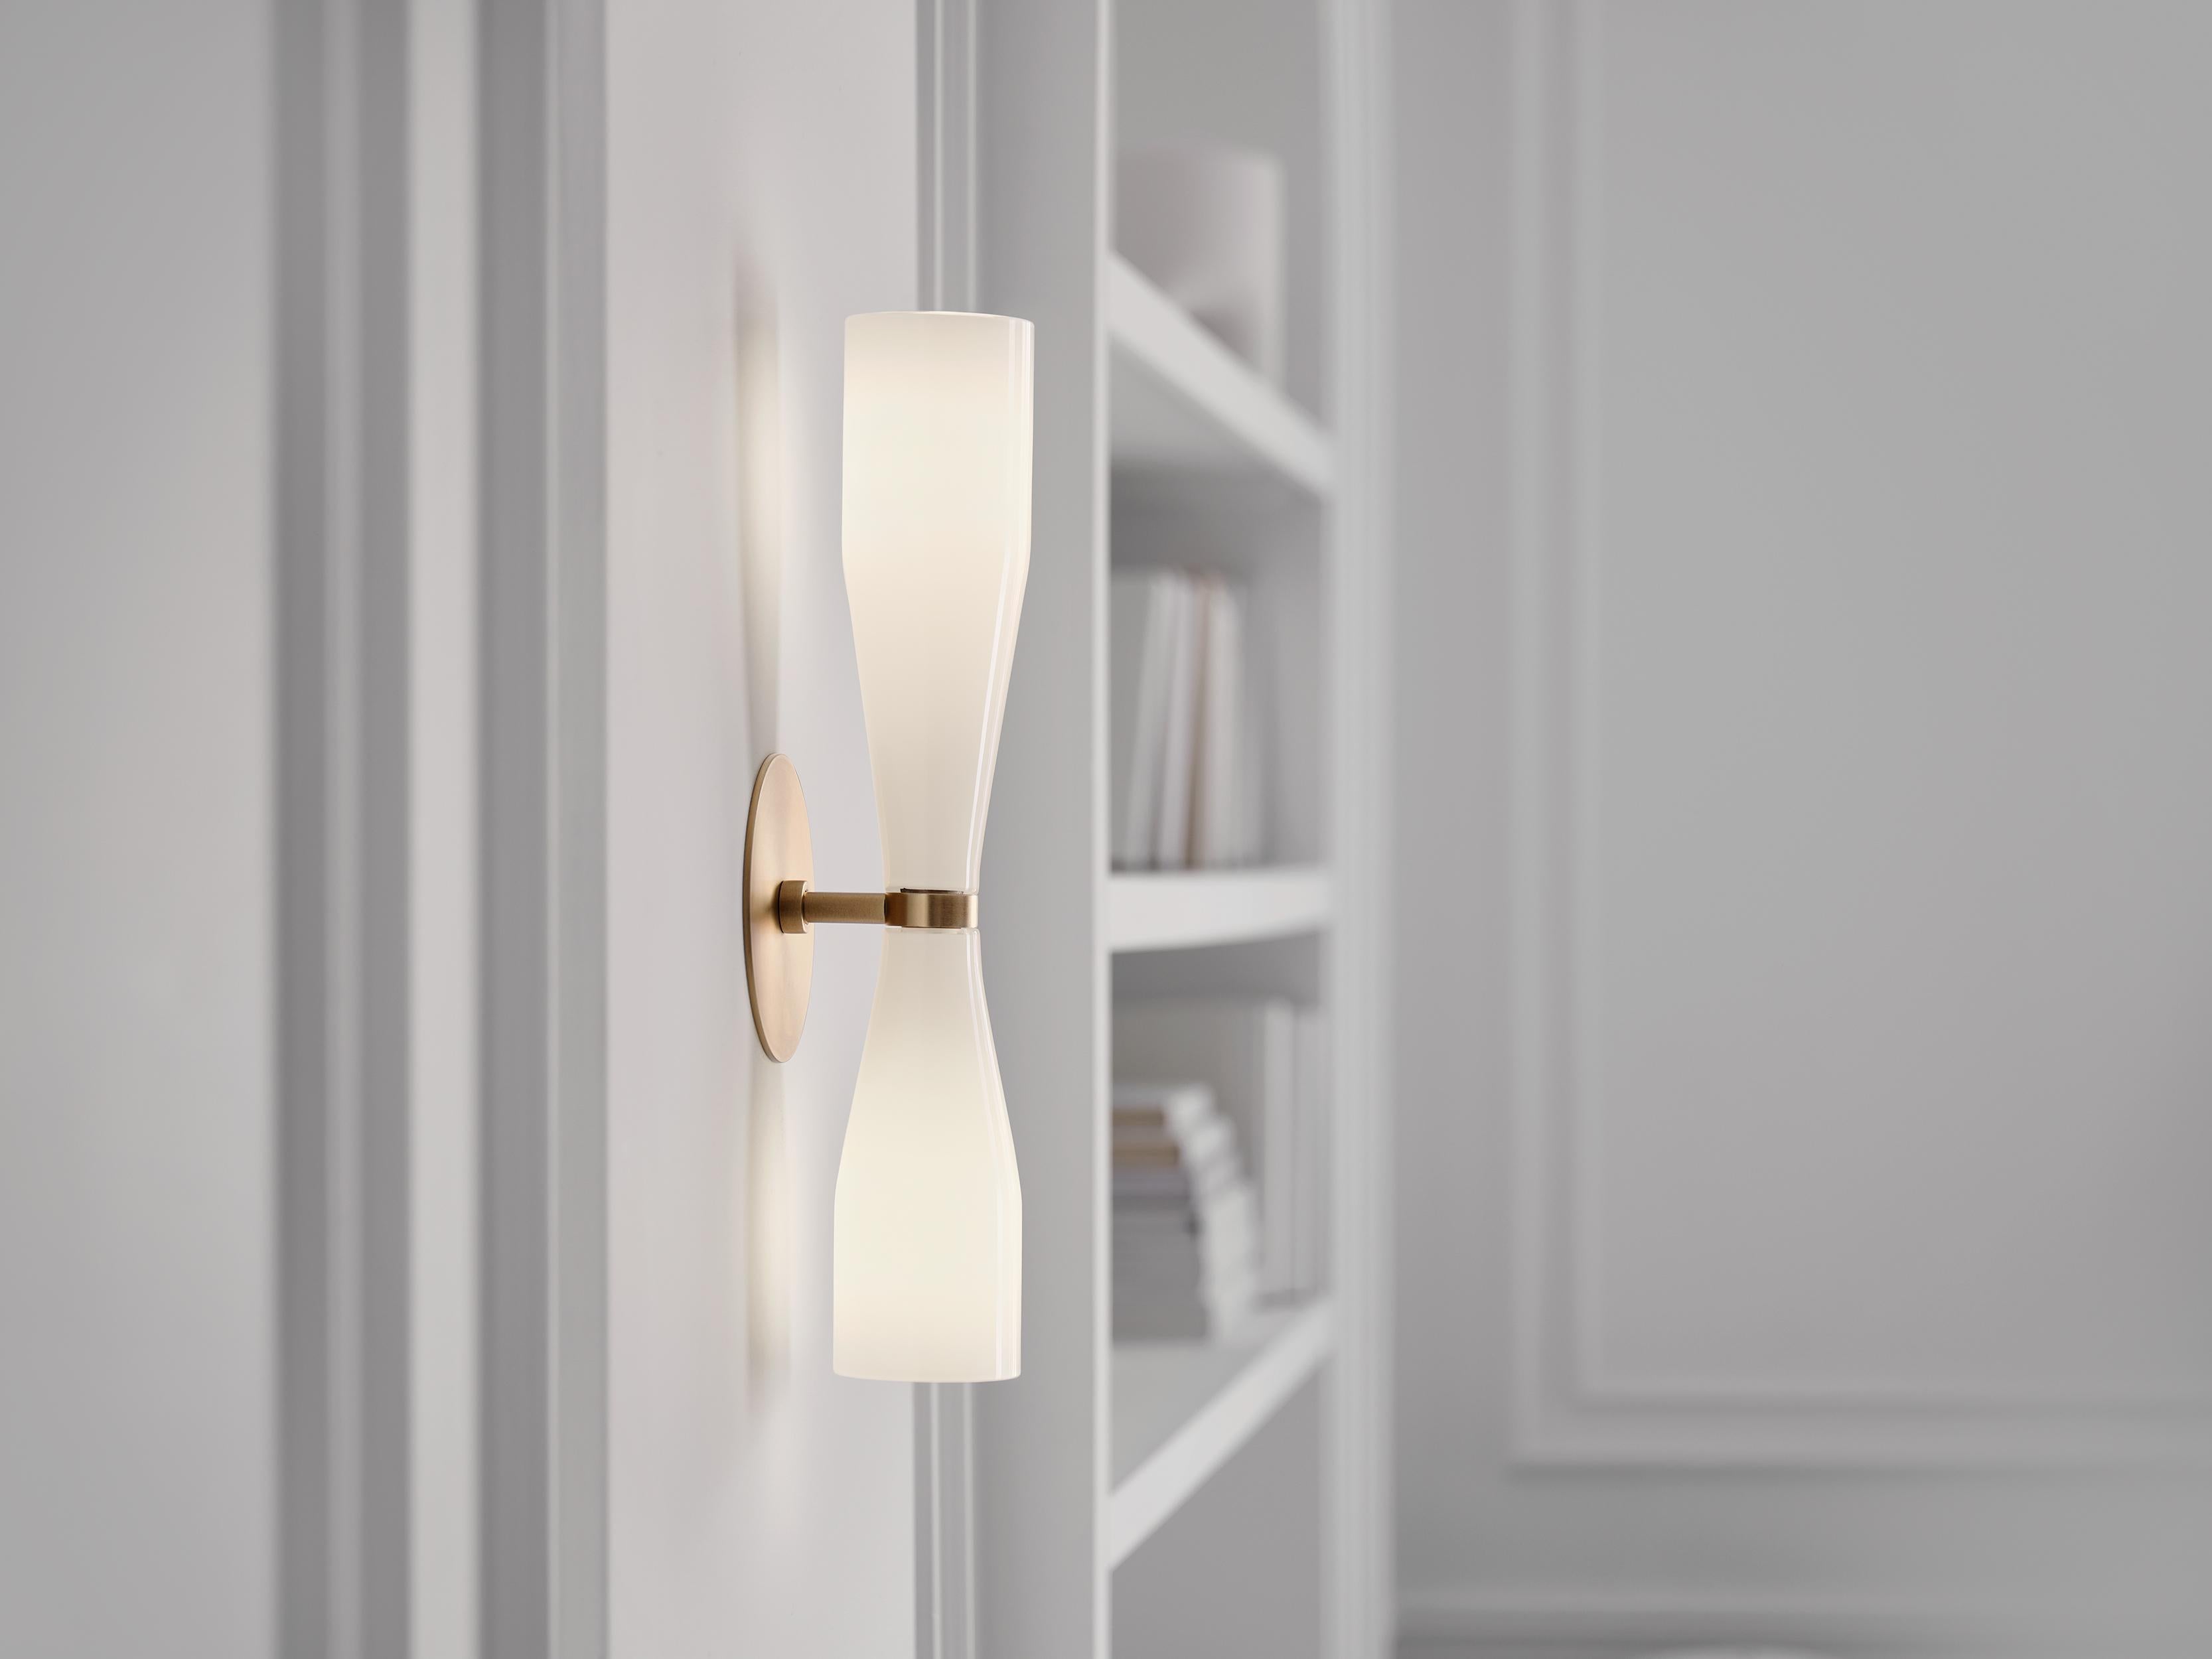 The Etcetera Sconce balances the sculptural with the streamlined. 

With an organic feel, the Etcetera Series uses design geometry to create pieces that are both clean-lined but natural. 

Entirely hand-made in Canada, Etcetera uses a small palette